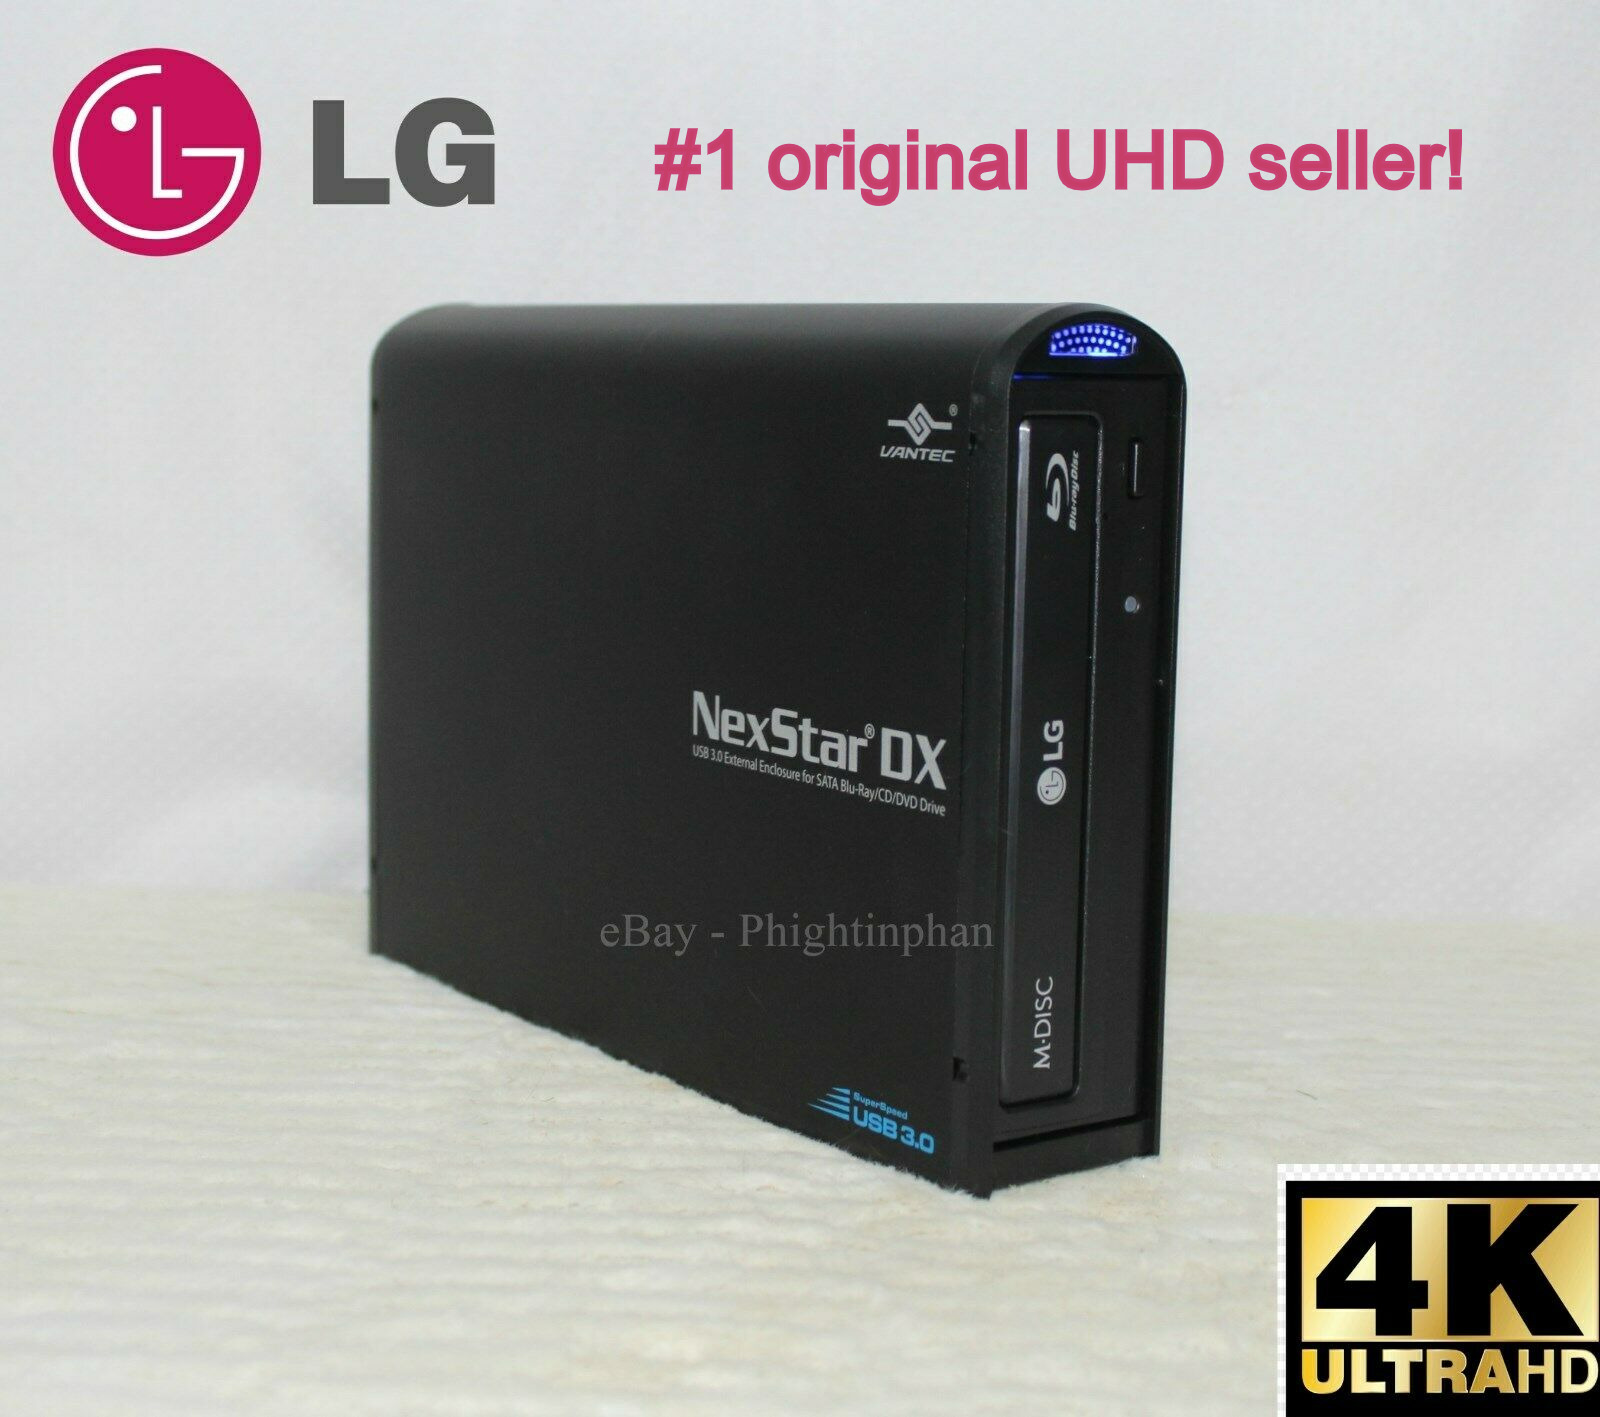 NEW External LG WH14NS40 with WH16NS40 firmware 1.02 4K, Ultra HD, UHD Friendly